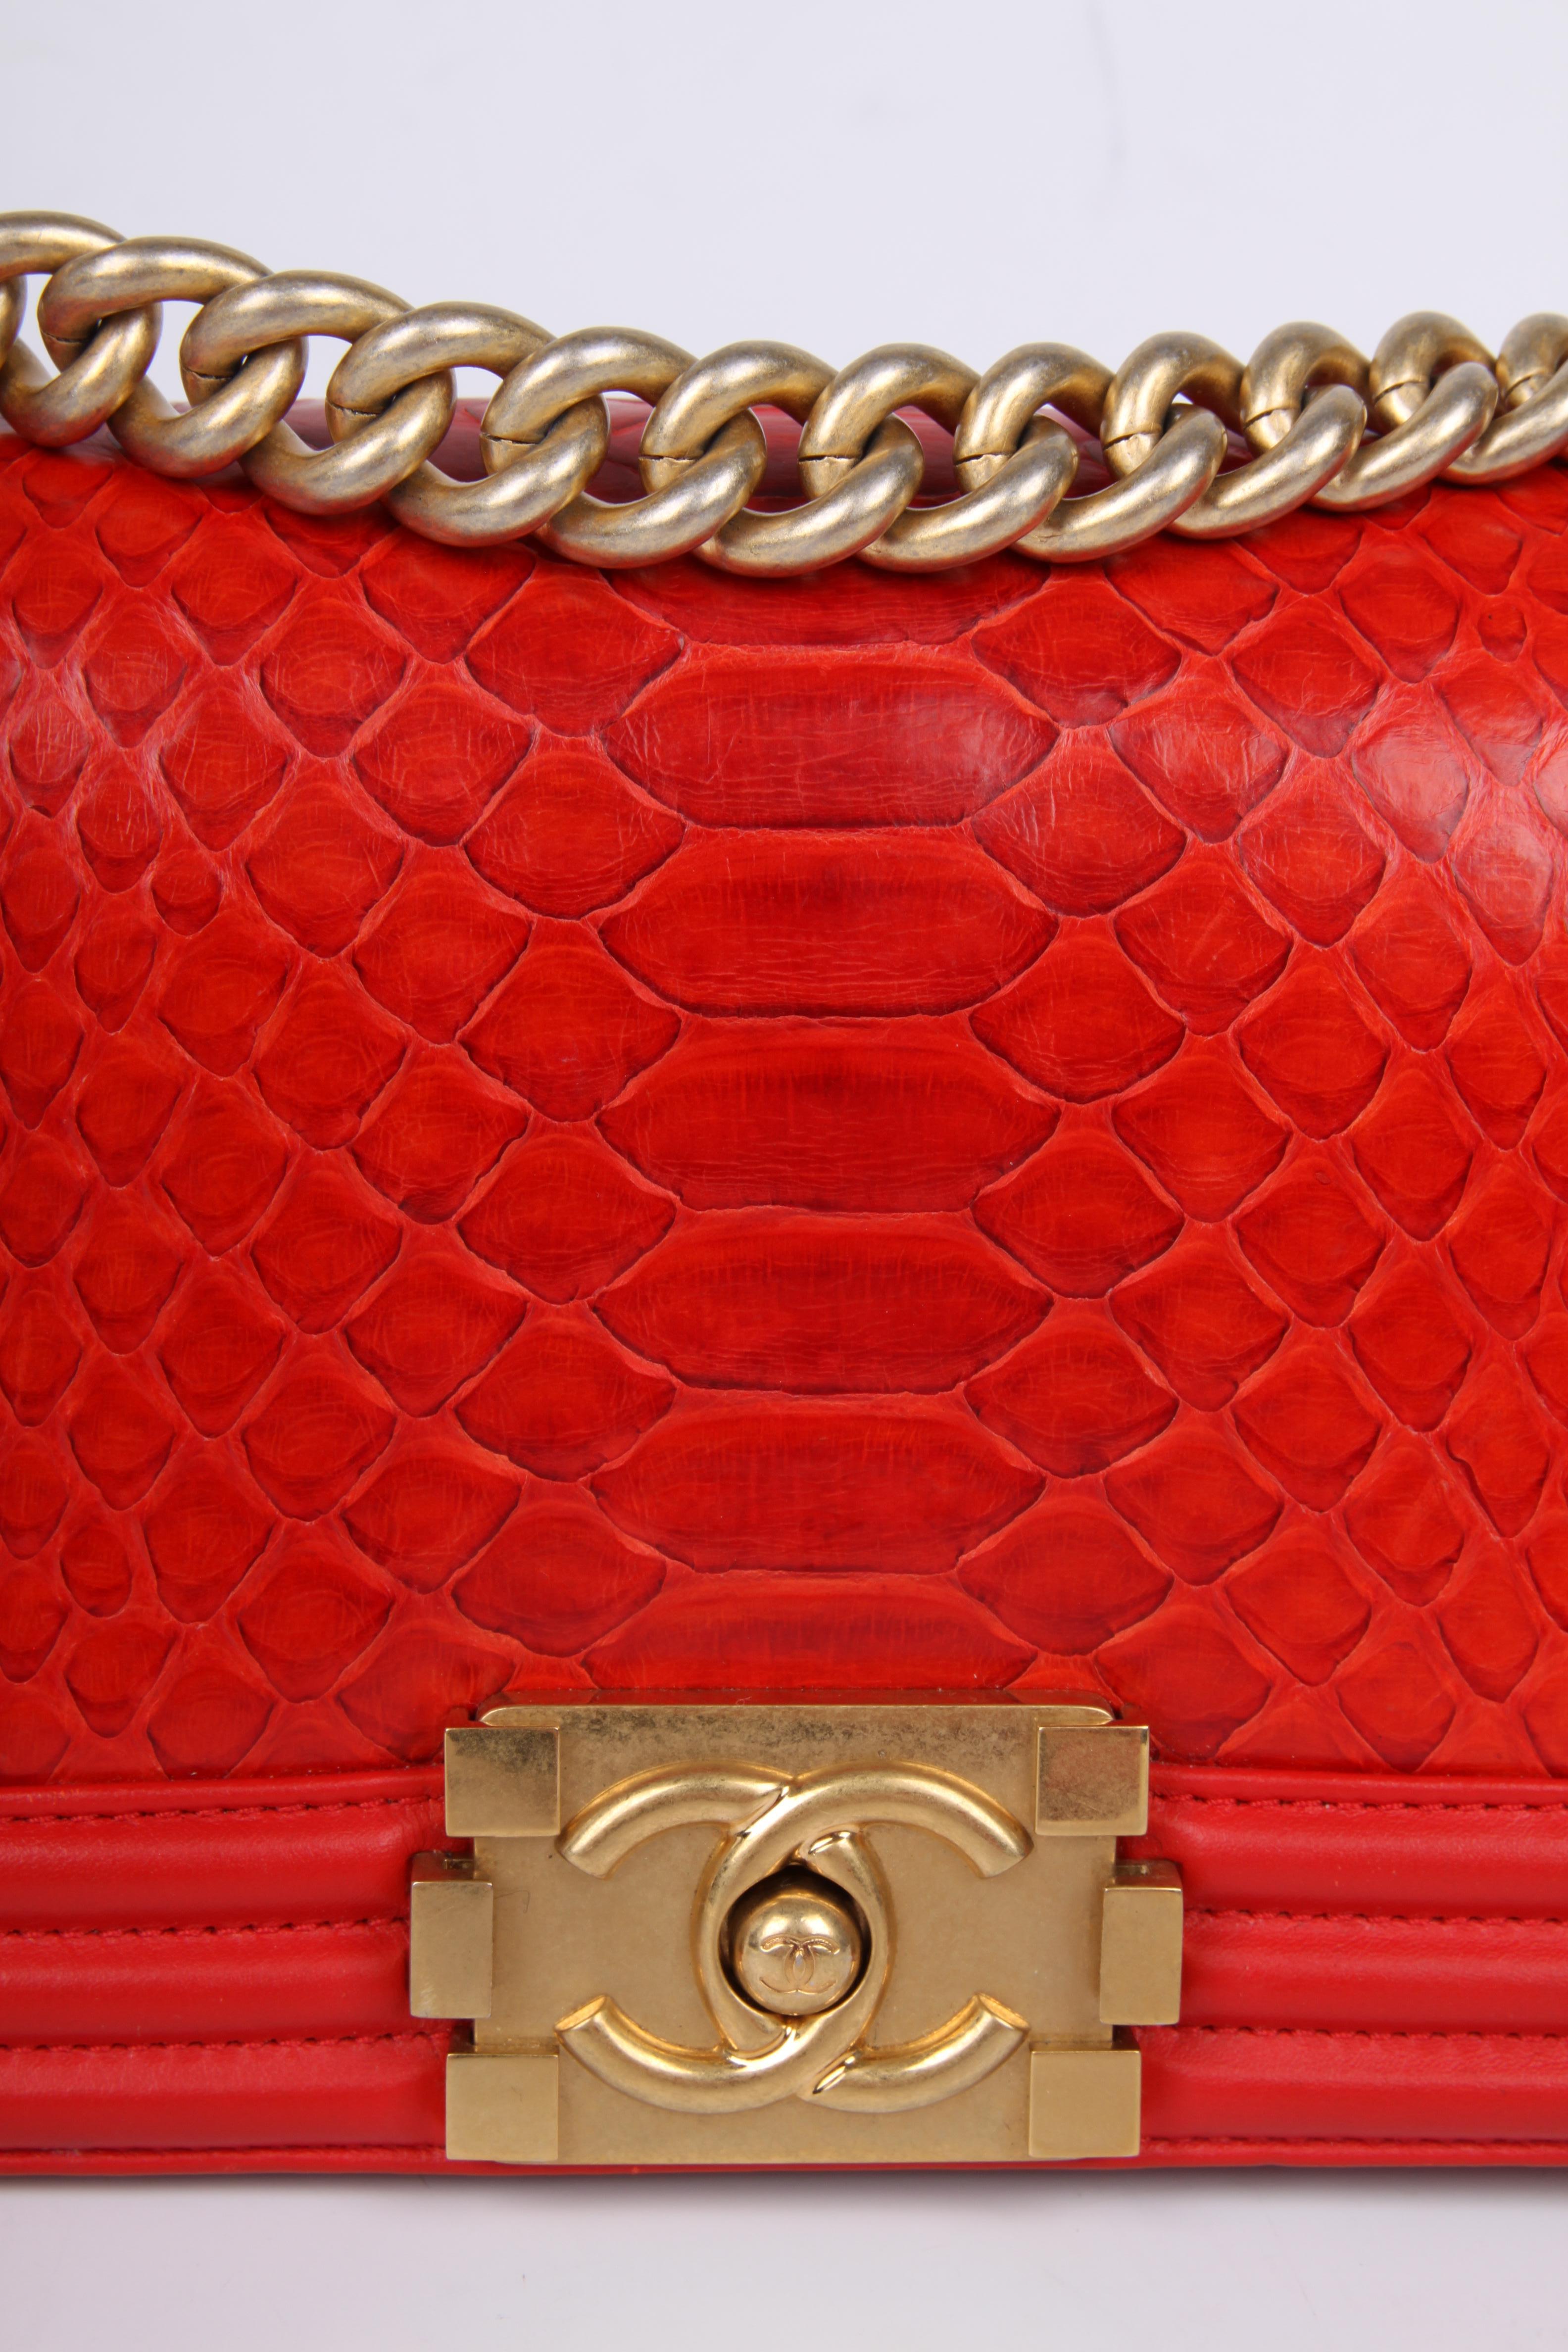   Chanel Quilted Lambskin & Python Le Boy Bag Mini - red    2